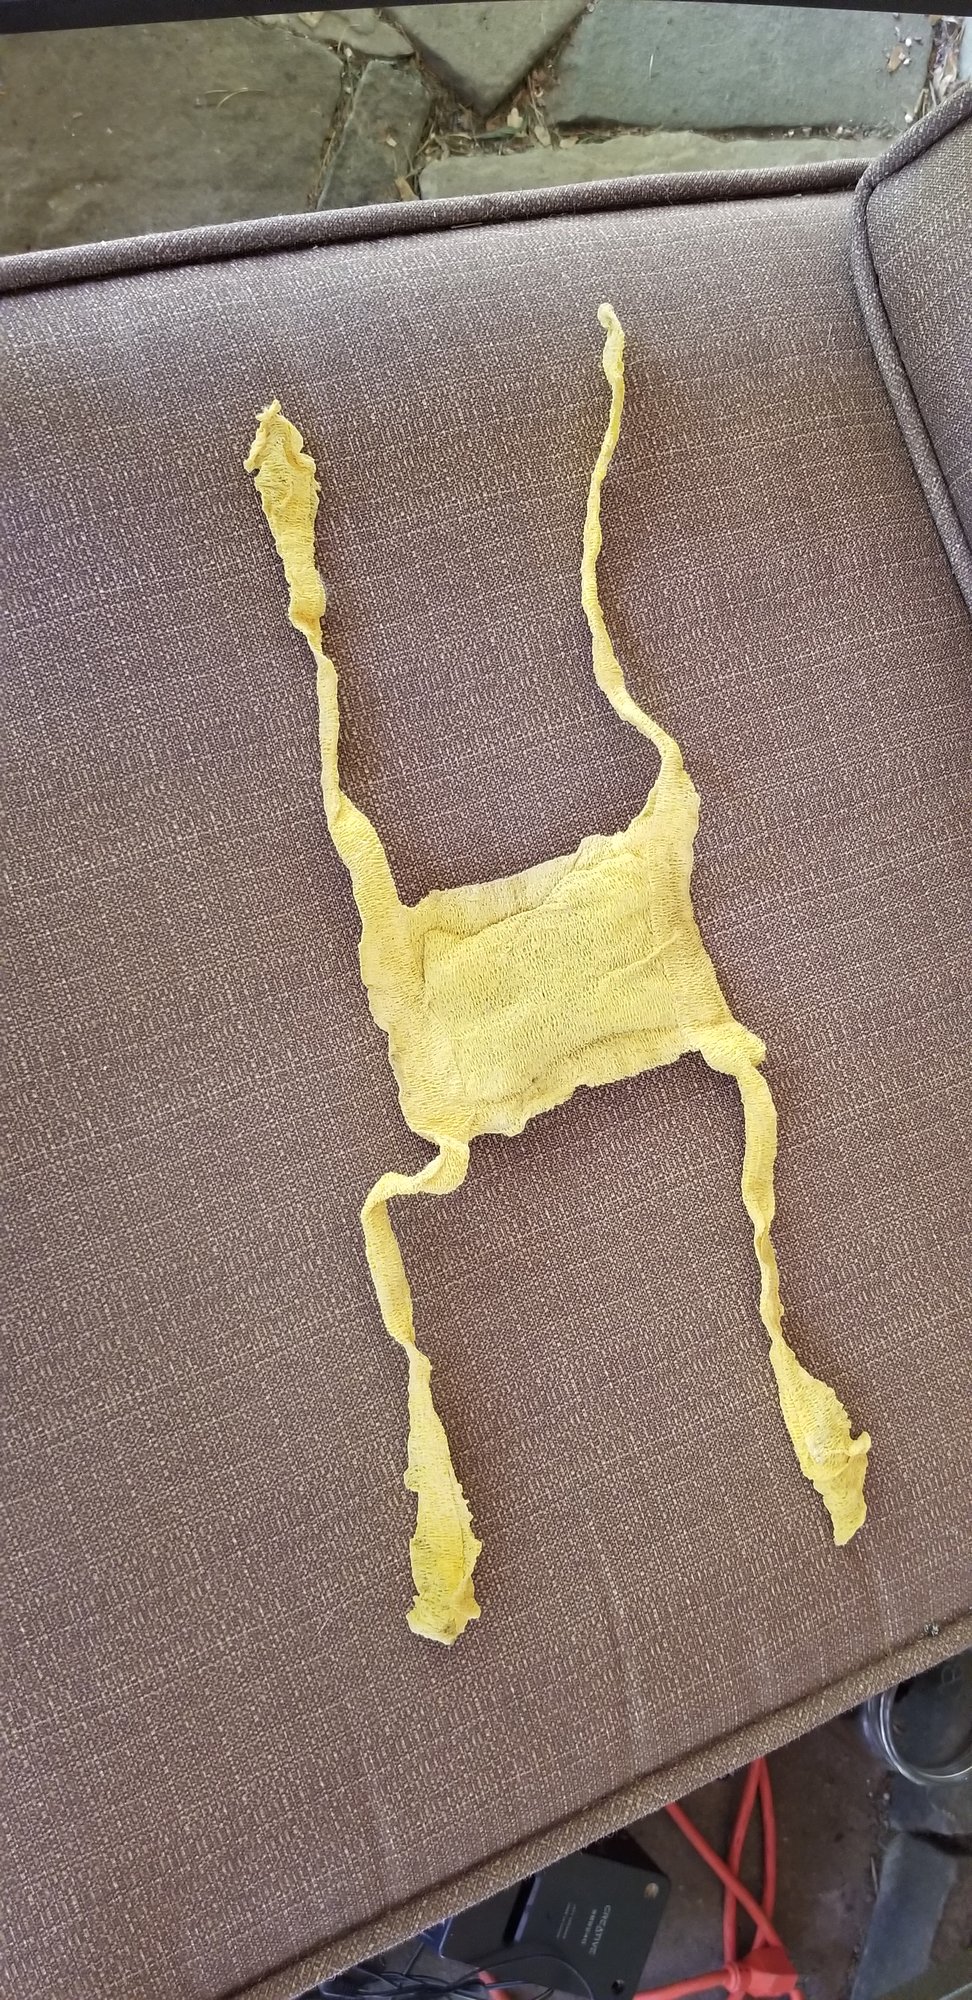 How to make a chicken bra from less than 4 feet of vet wrap.